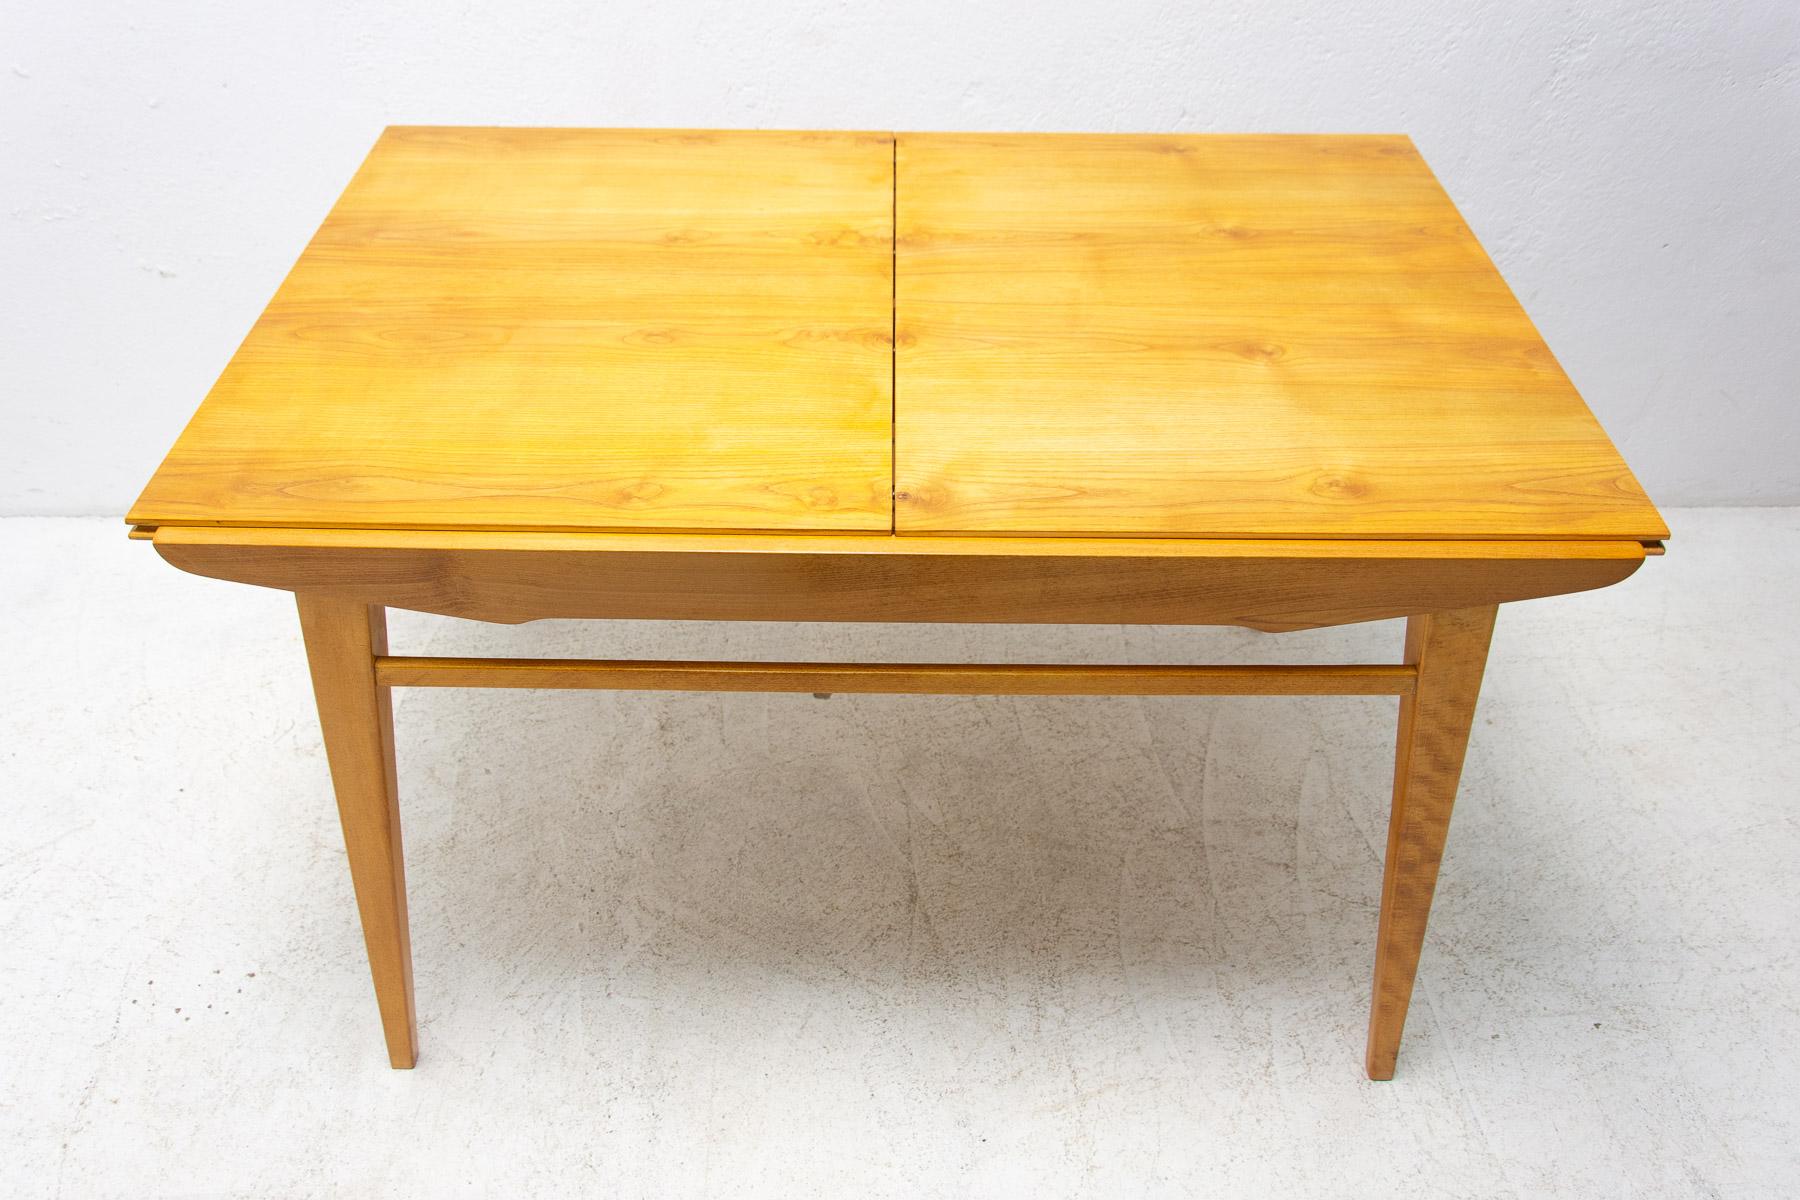 Wood Midcentury Folding Dining Table by Bohumil Landsman for Jitona, 1970s For Sale